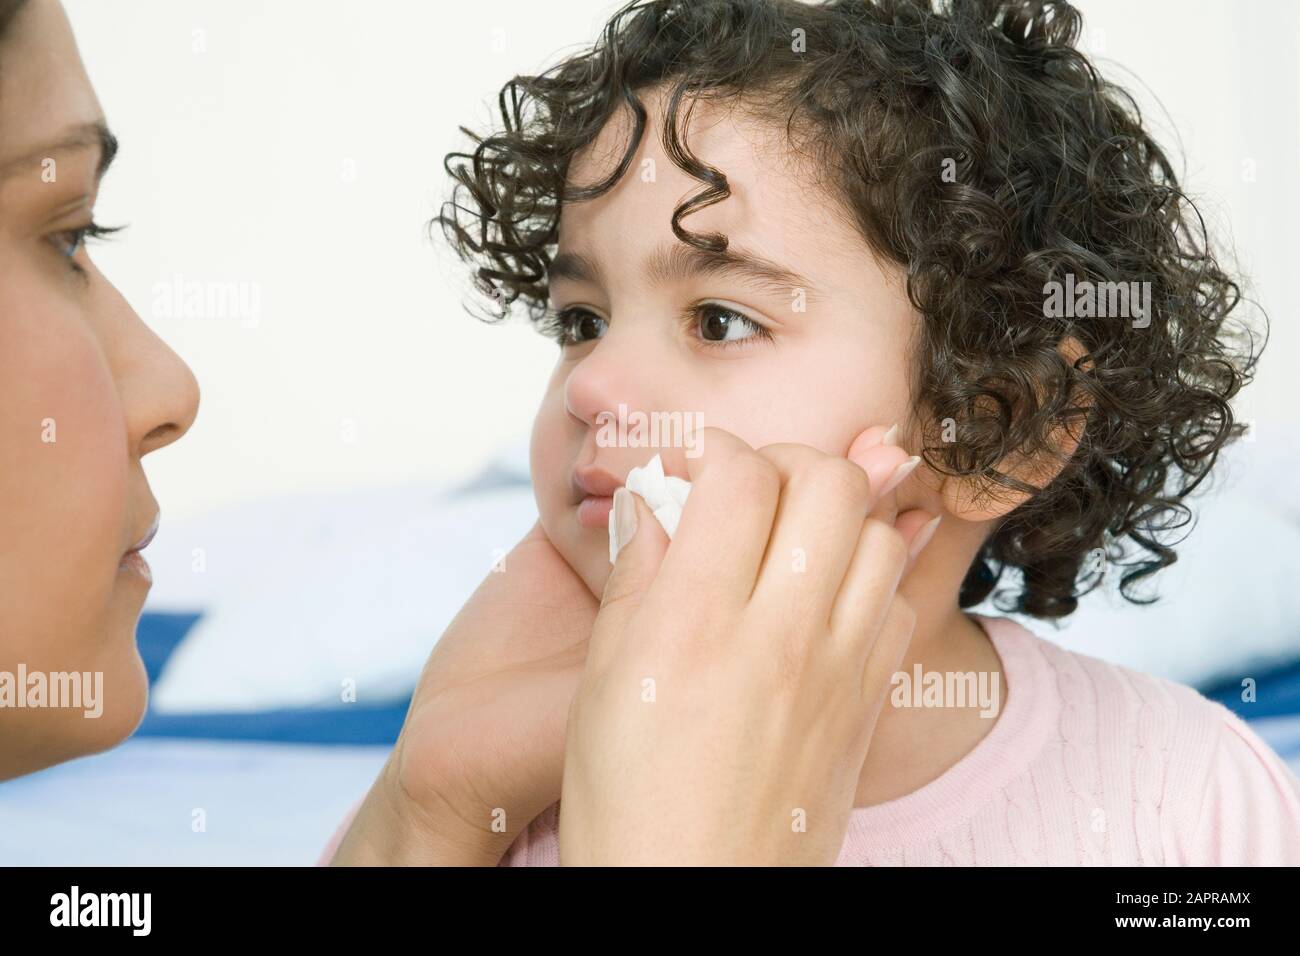 Mother wiping childs tears Stock Photo